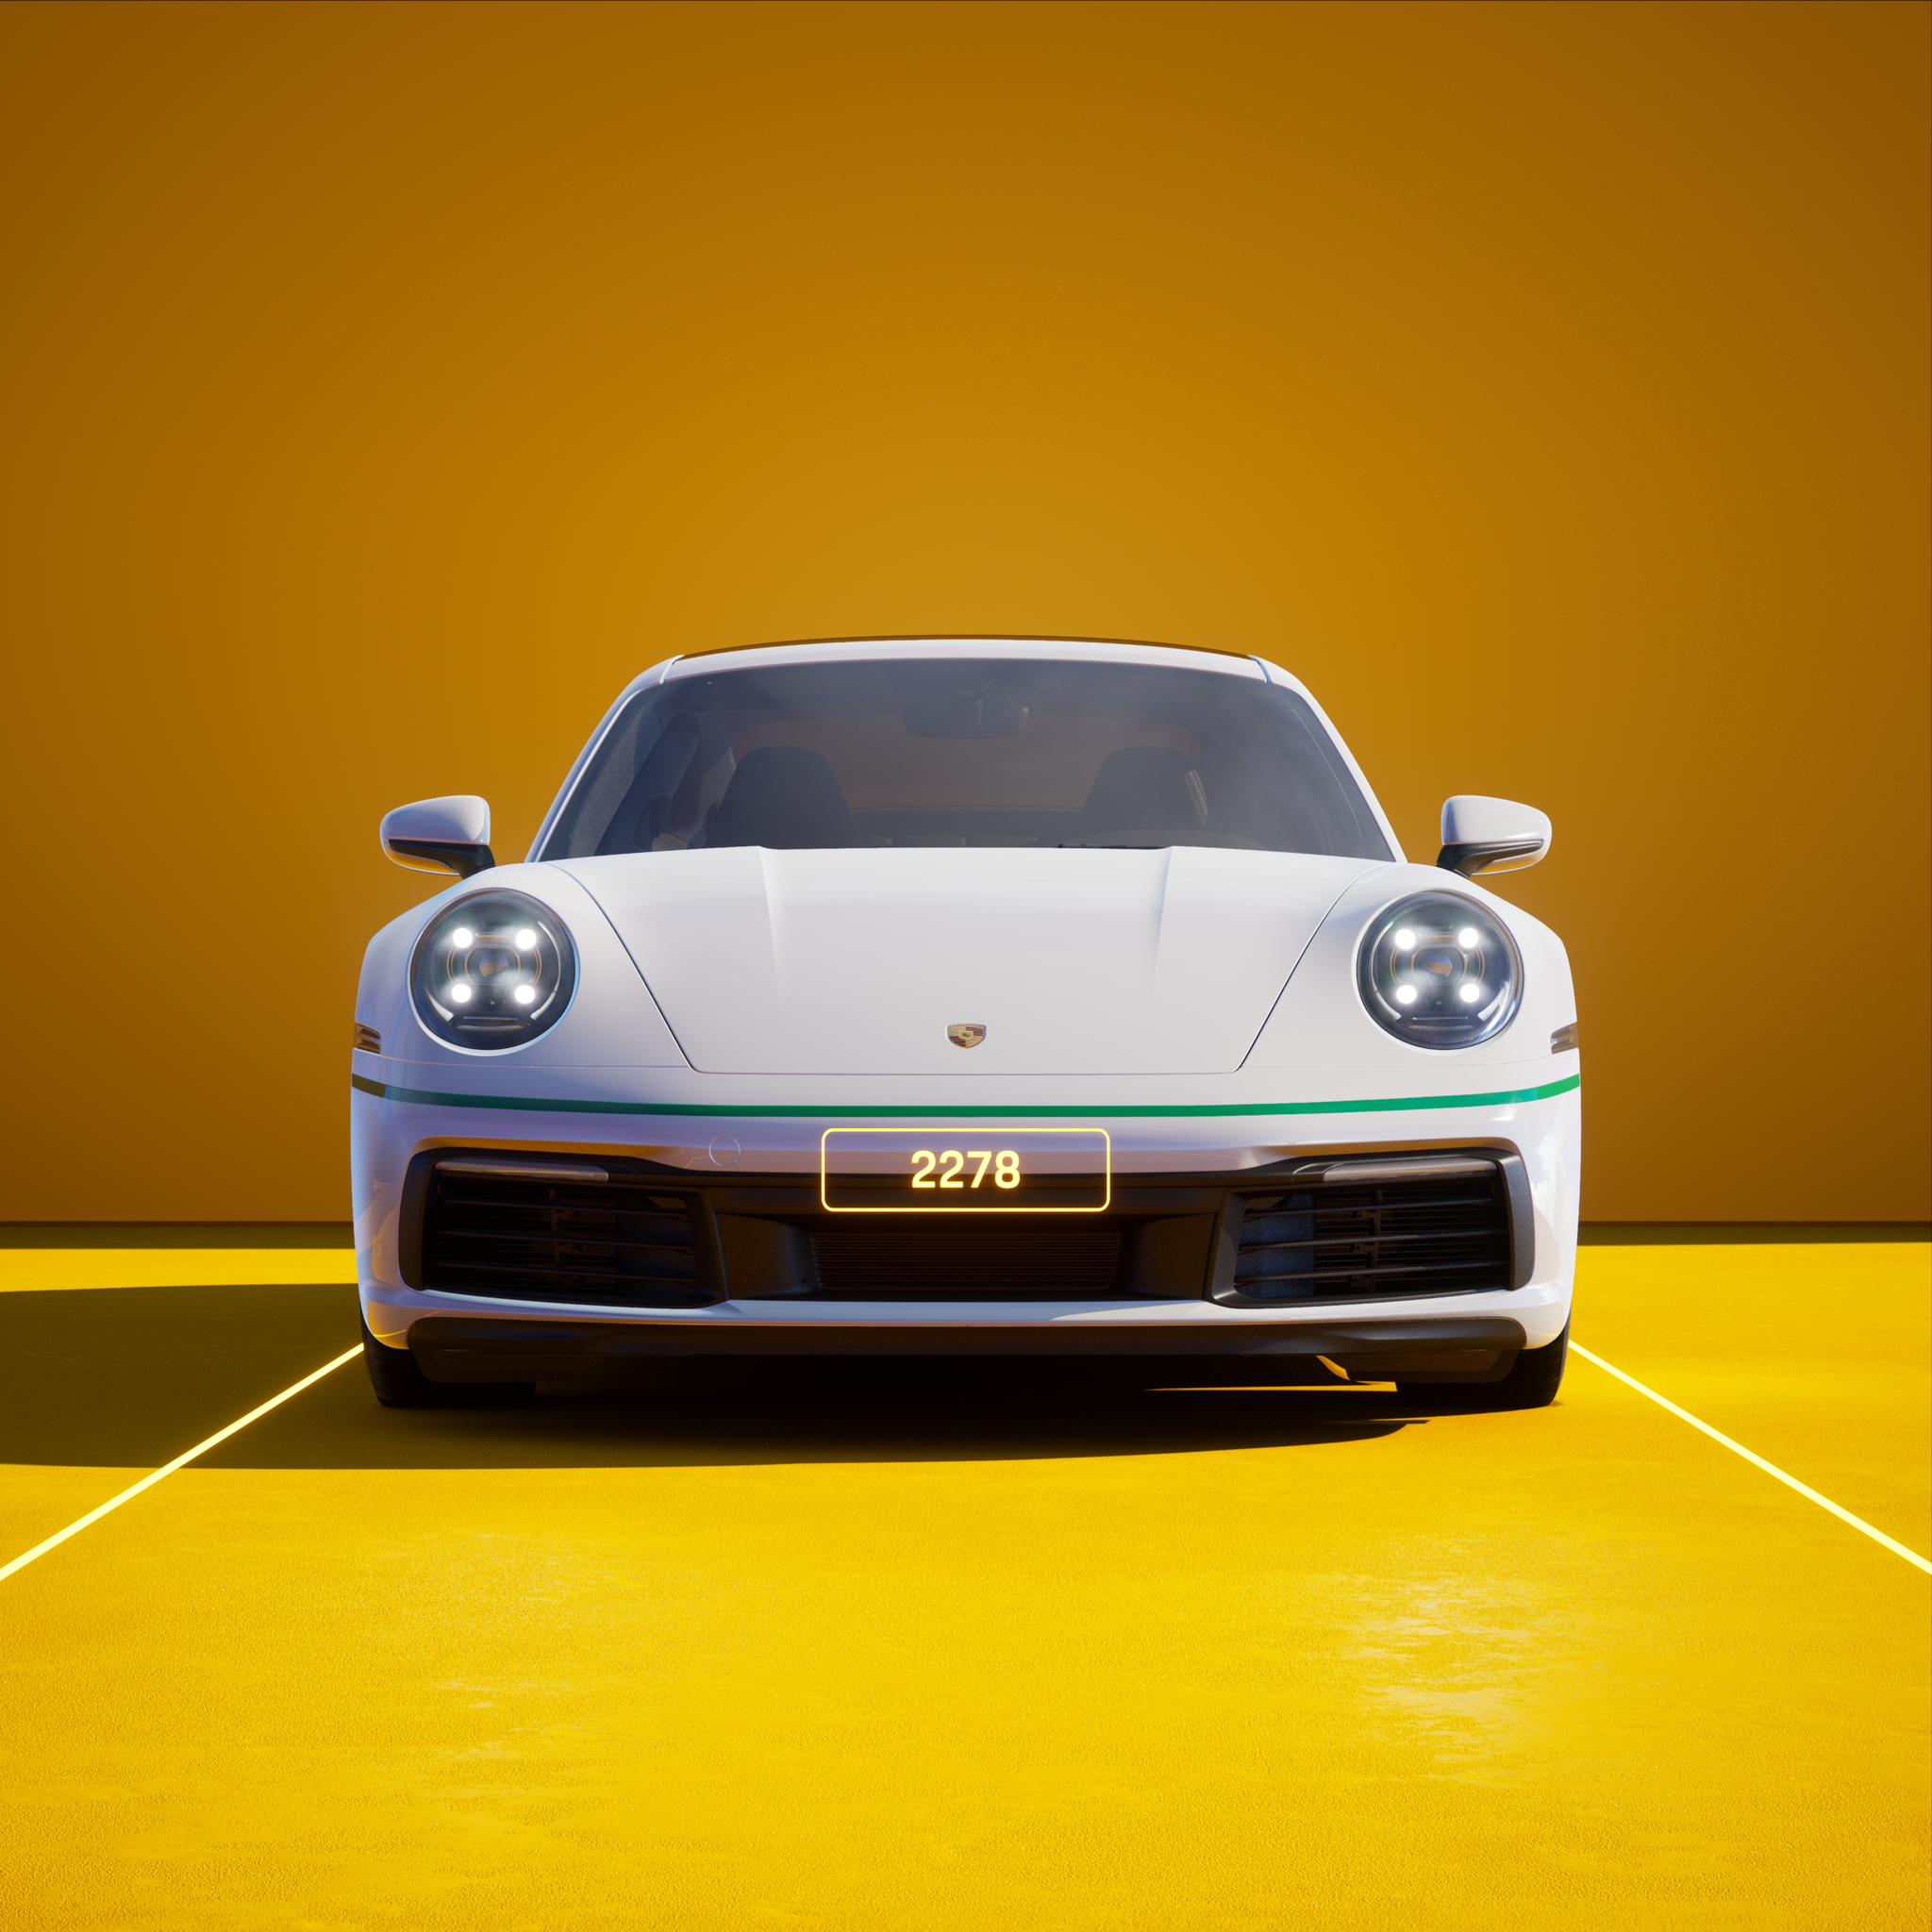 The PORSCHΞ 911 2278 image in phase